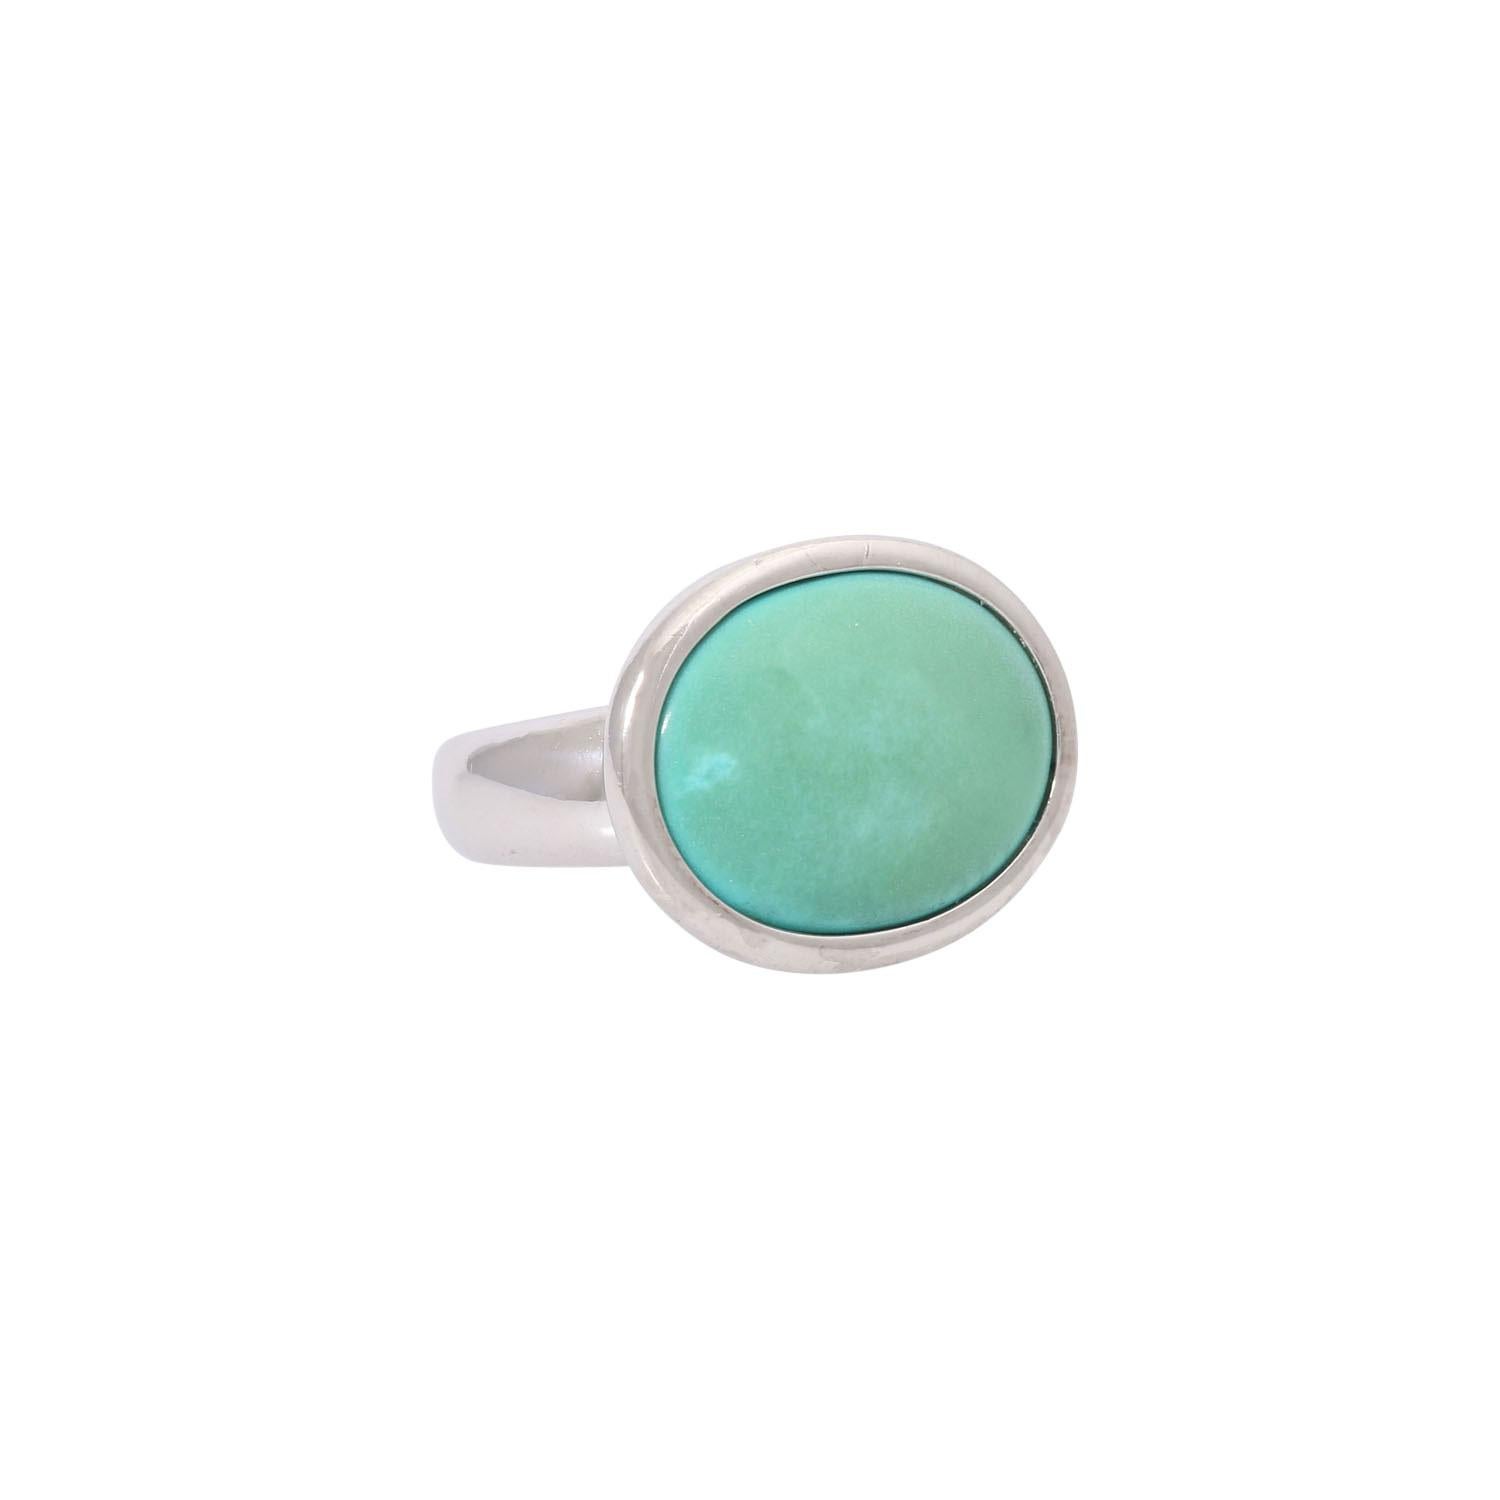 of approx. 16x20 mm, 14k white gold, 15.8 gr, RW: 58, 20./21. Century, slight traces of carrying, turquoise slightly discolored.

 Ring with Turquoise Cabochon of approx. 16x20 mm, 14k White Gold, 15.8 Gr, Ring Size 58, 20th/21st Century, Minor